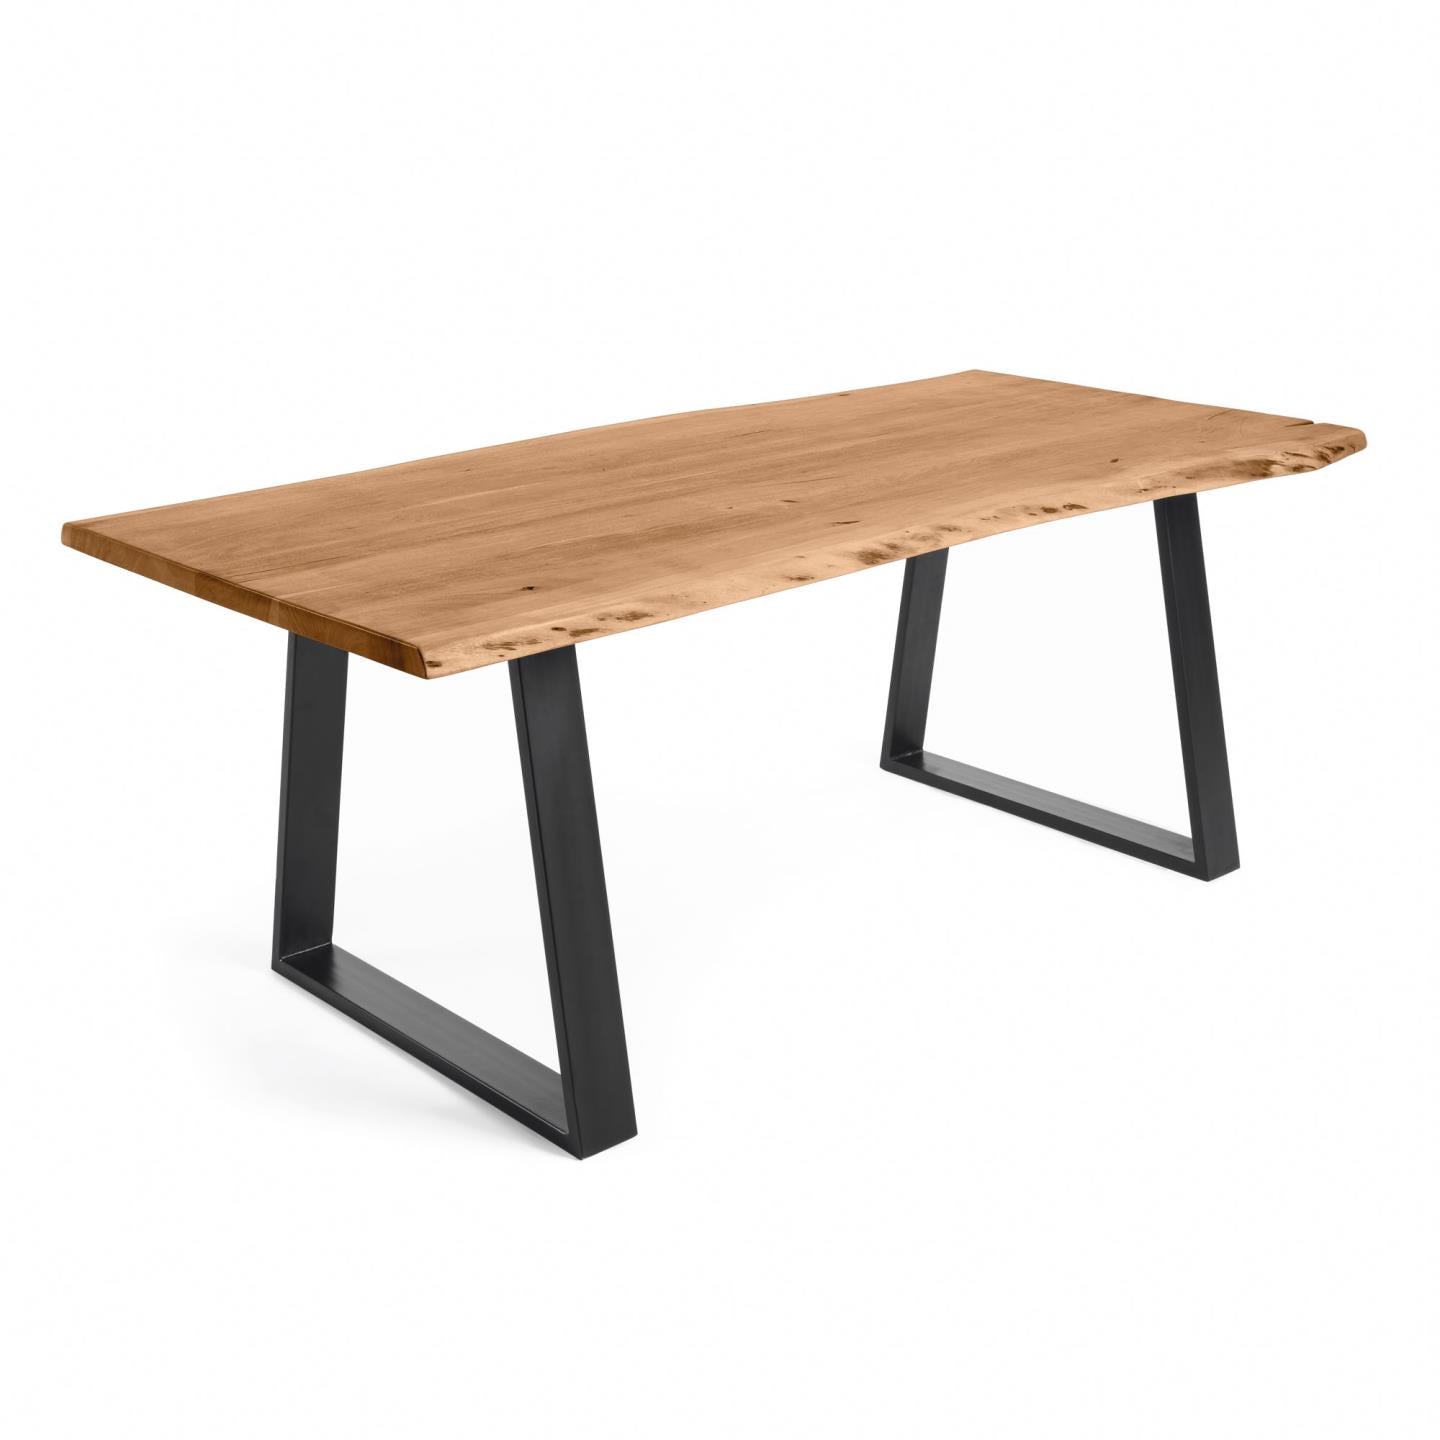 Alaia table in solid acacia wood with natural finish, 160 x 90 cm